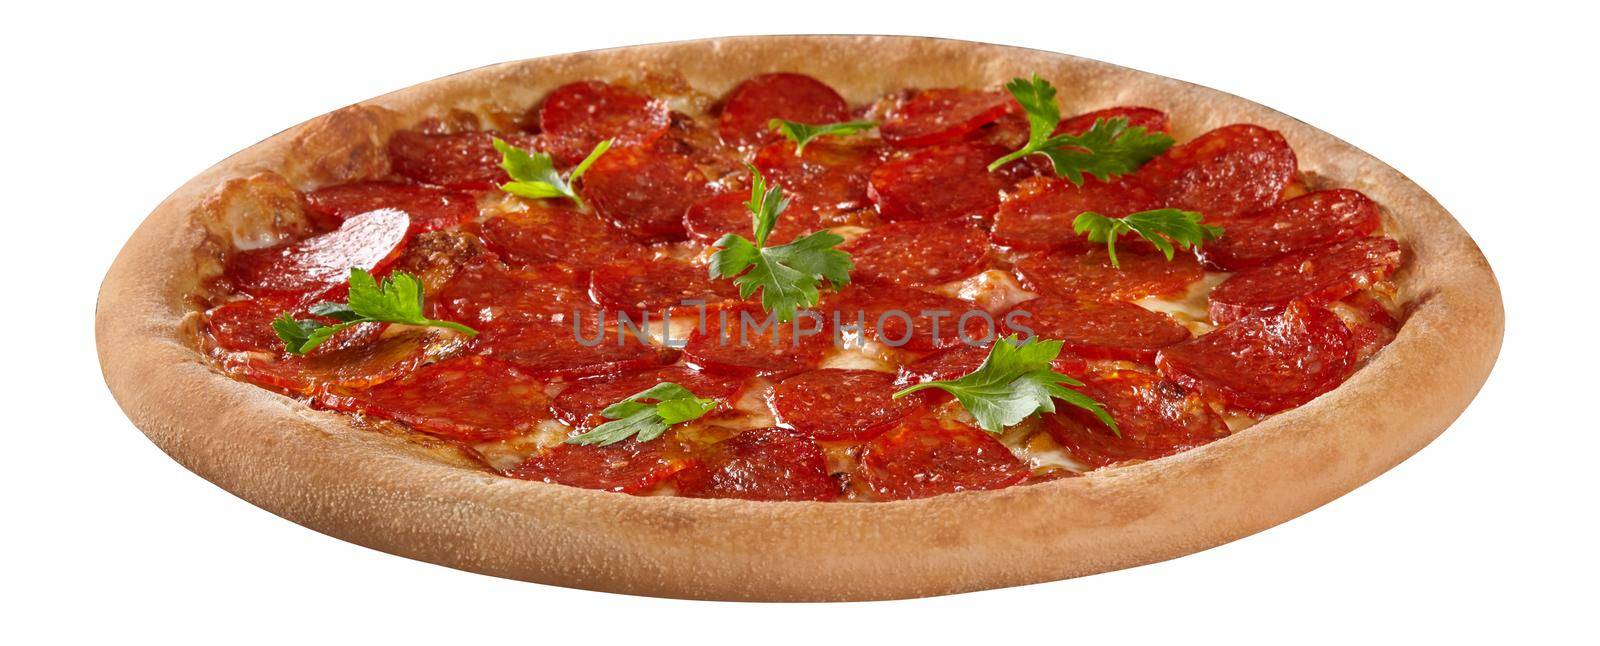 Closeup of piquant pizza with thin slices of spicy pepperoni sausage on layer of browned melted mozzarella cheese and pelati sauce garnished with fresh parsley isolated on white background